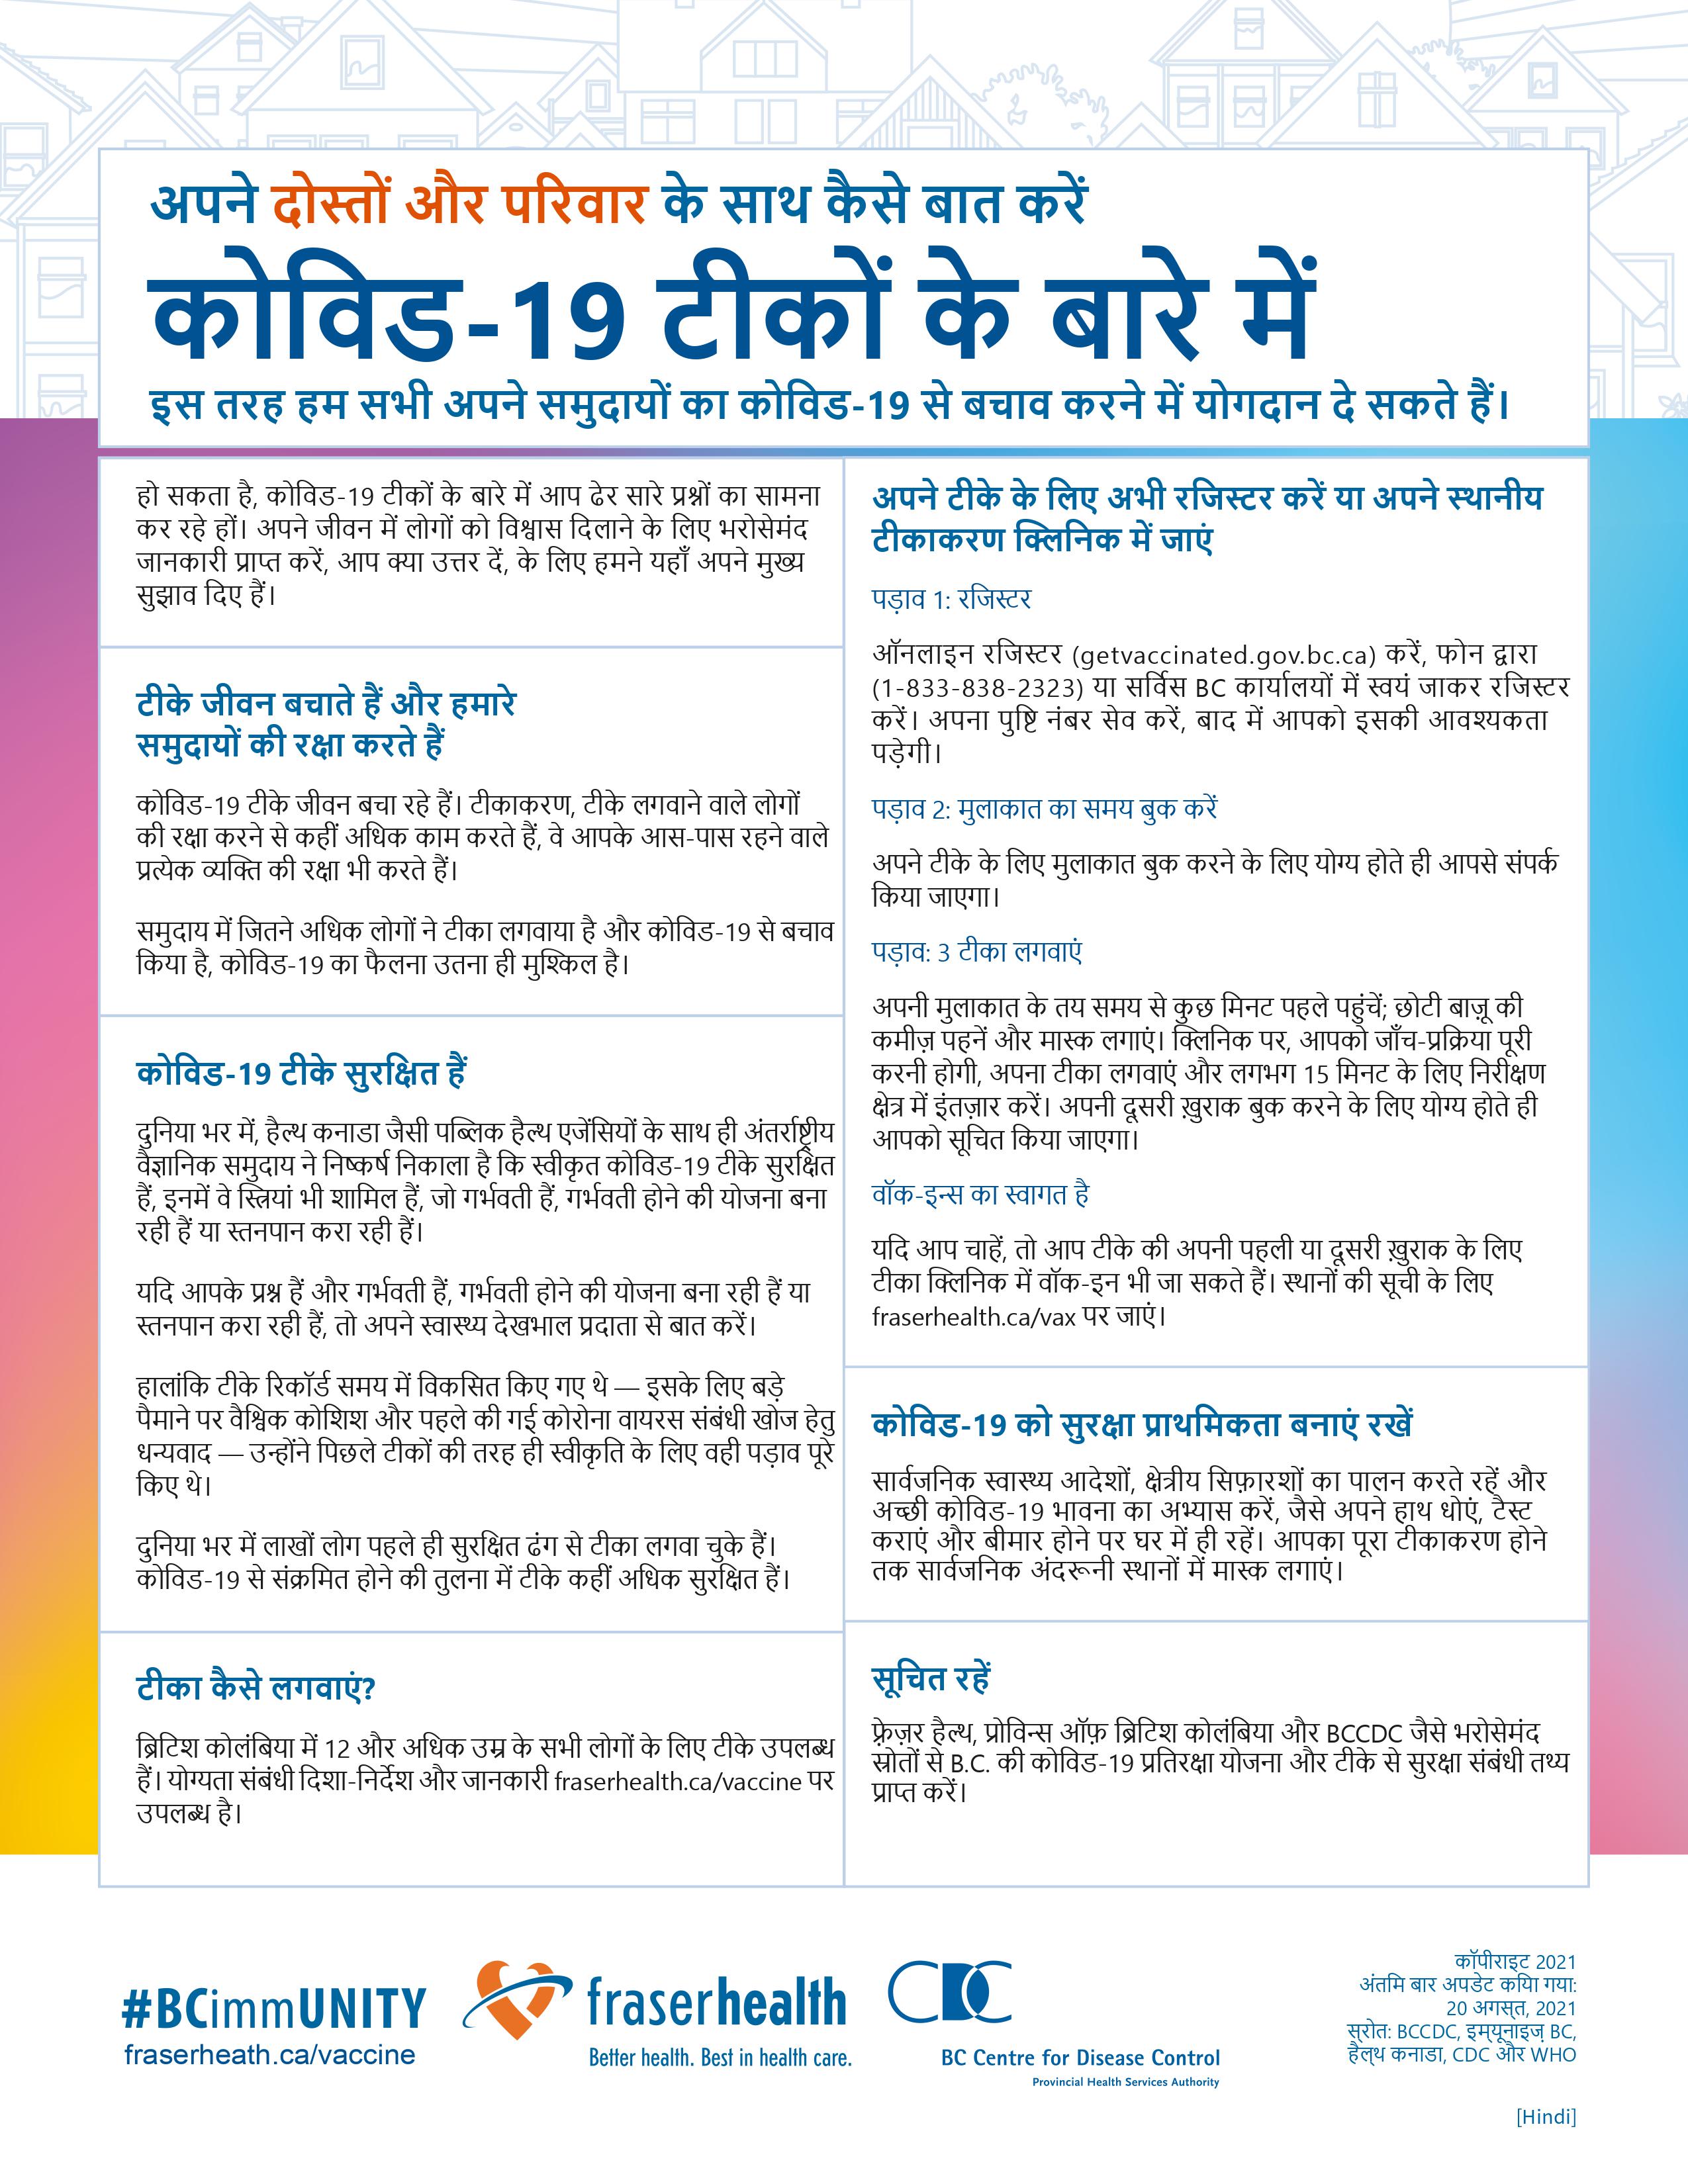 Infographic on how to talk to your friends about COVID-19 vaccines in Hindi